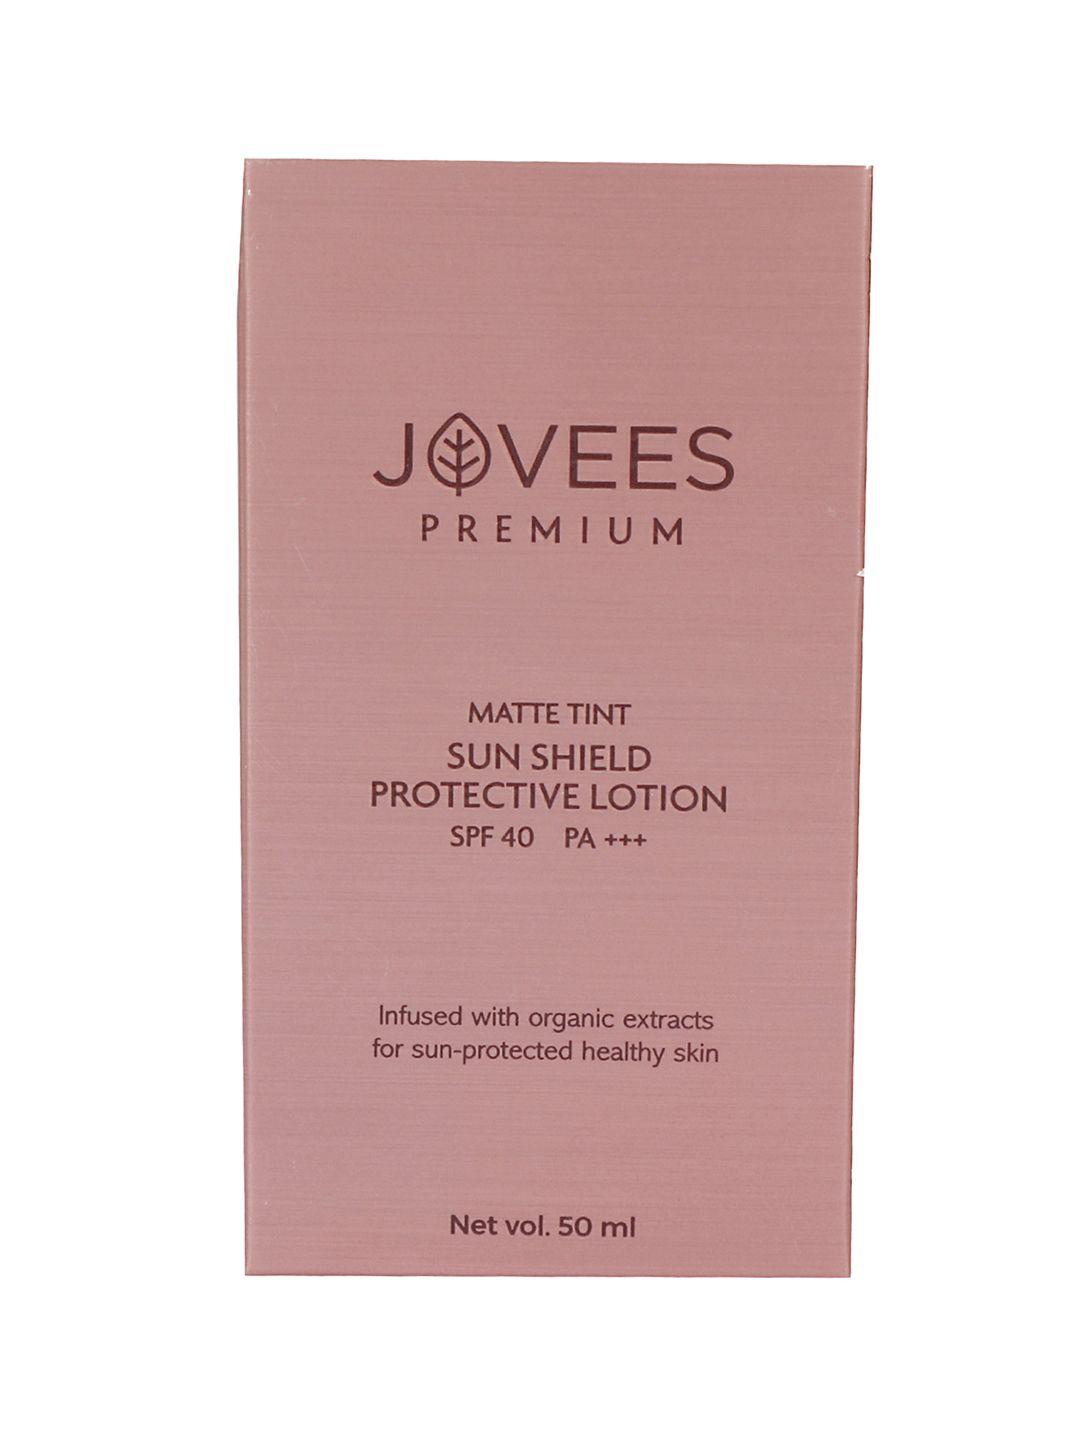 jovees sun shield matte tint protective lotion with spf 40 pa+++ - 50 ml